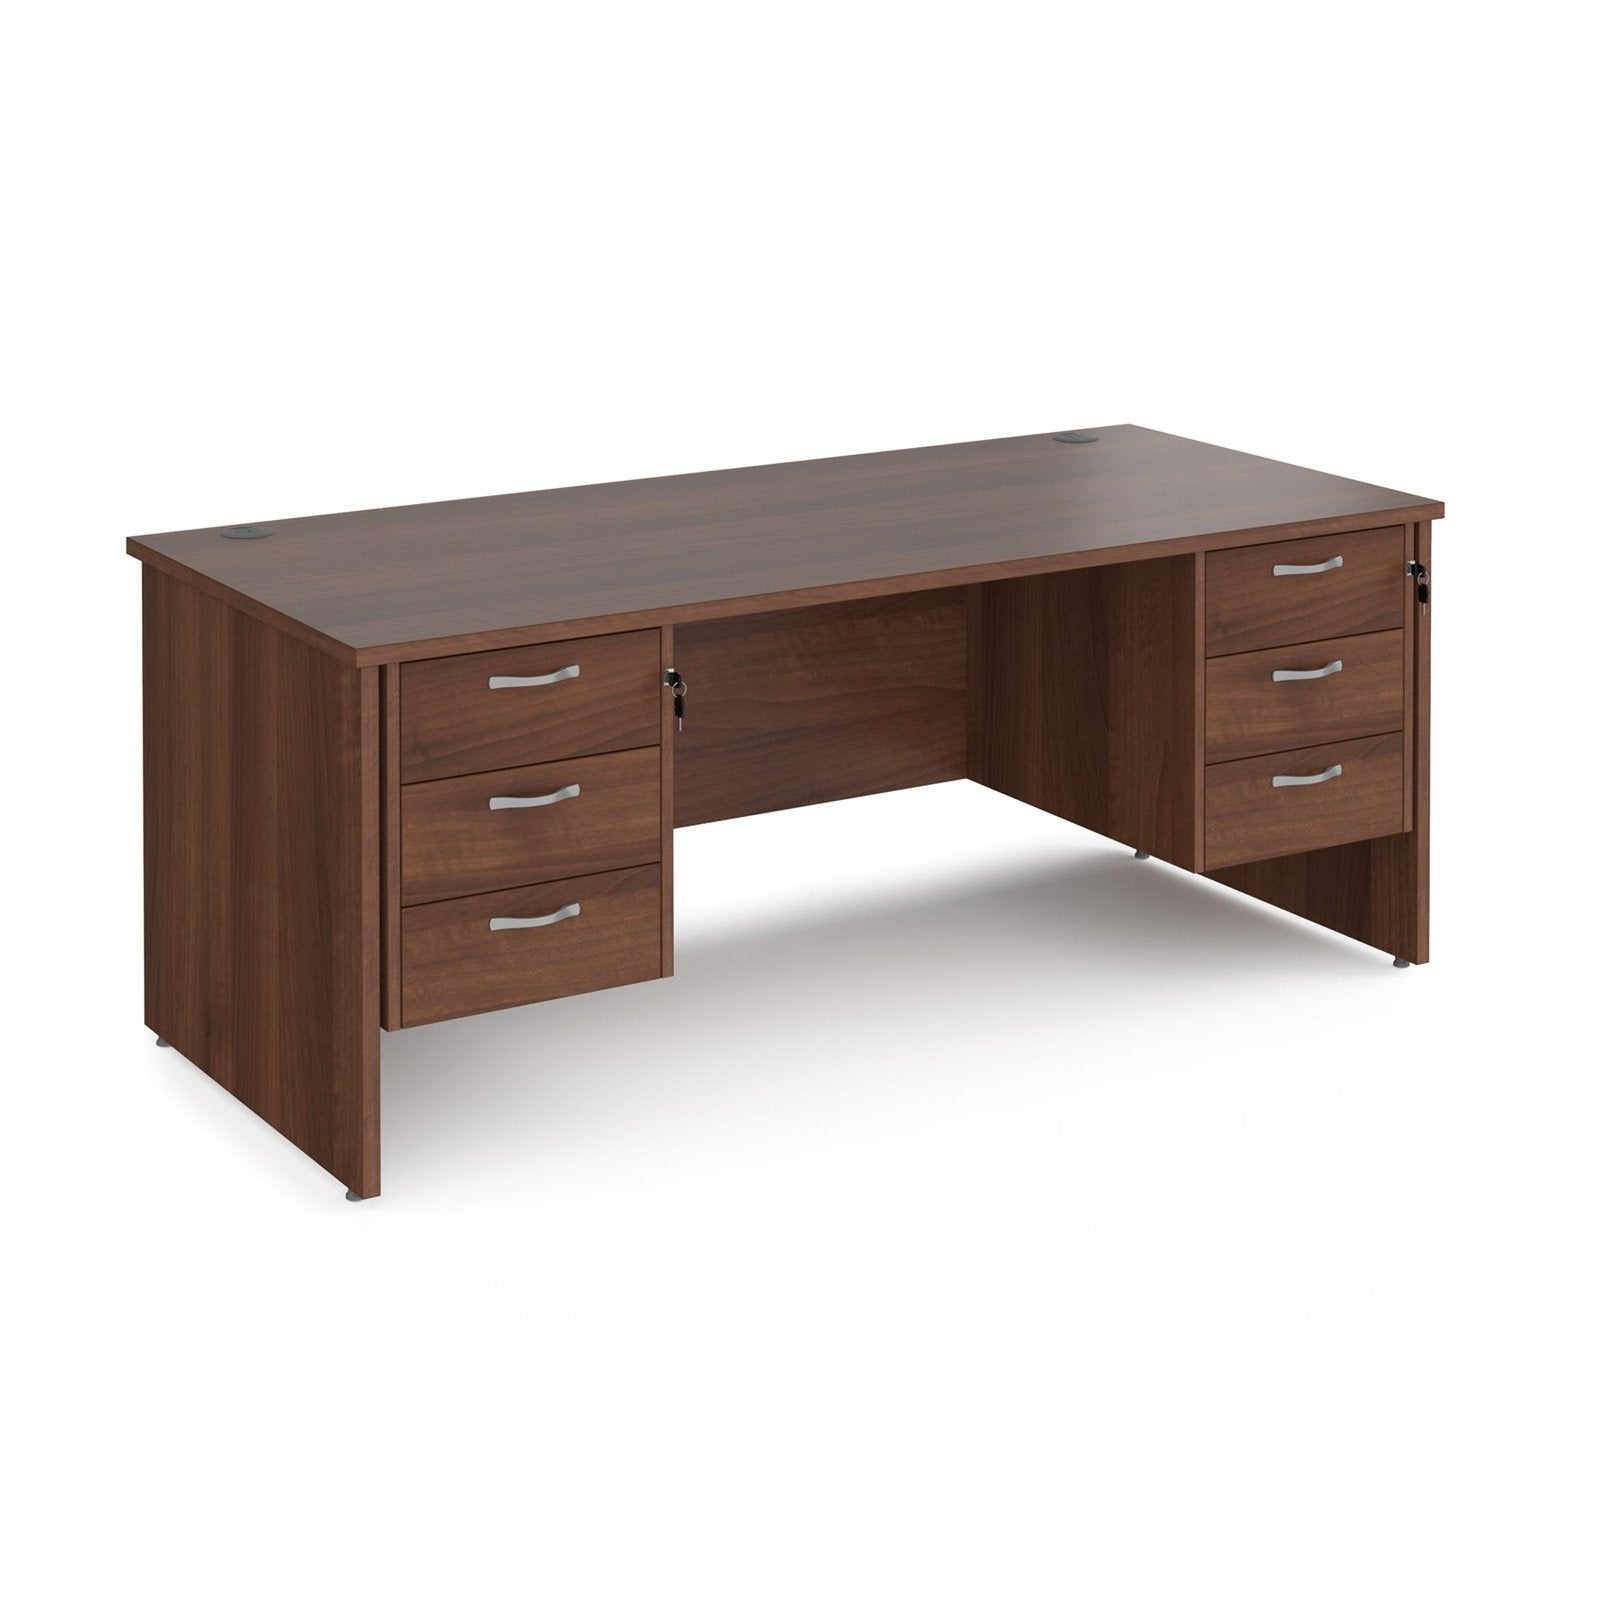 Maestro 25 panel leg straight desk 800 deep with two x 3 drawer pedestals - Office Products Online